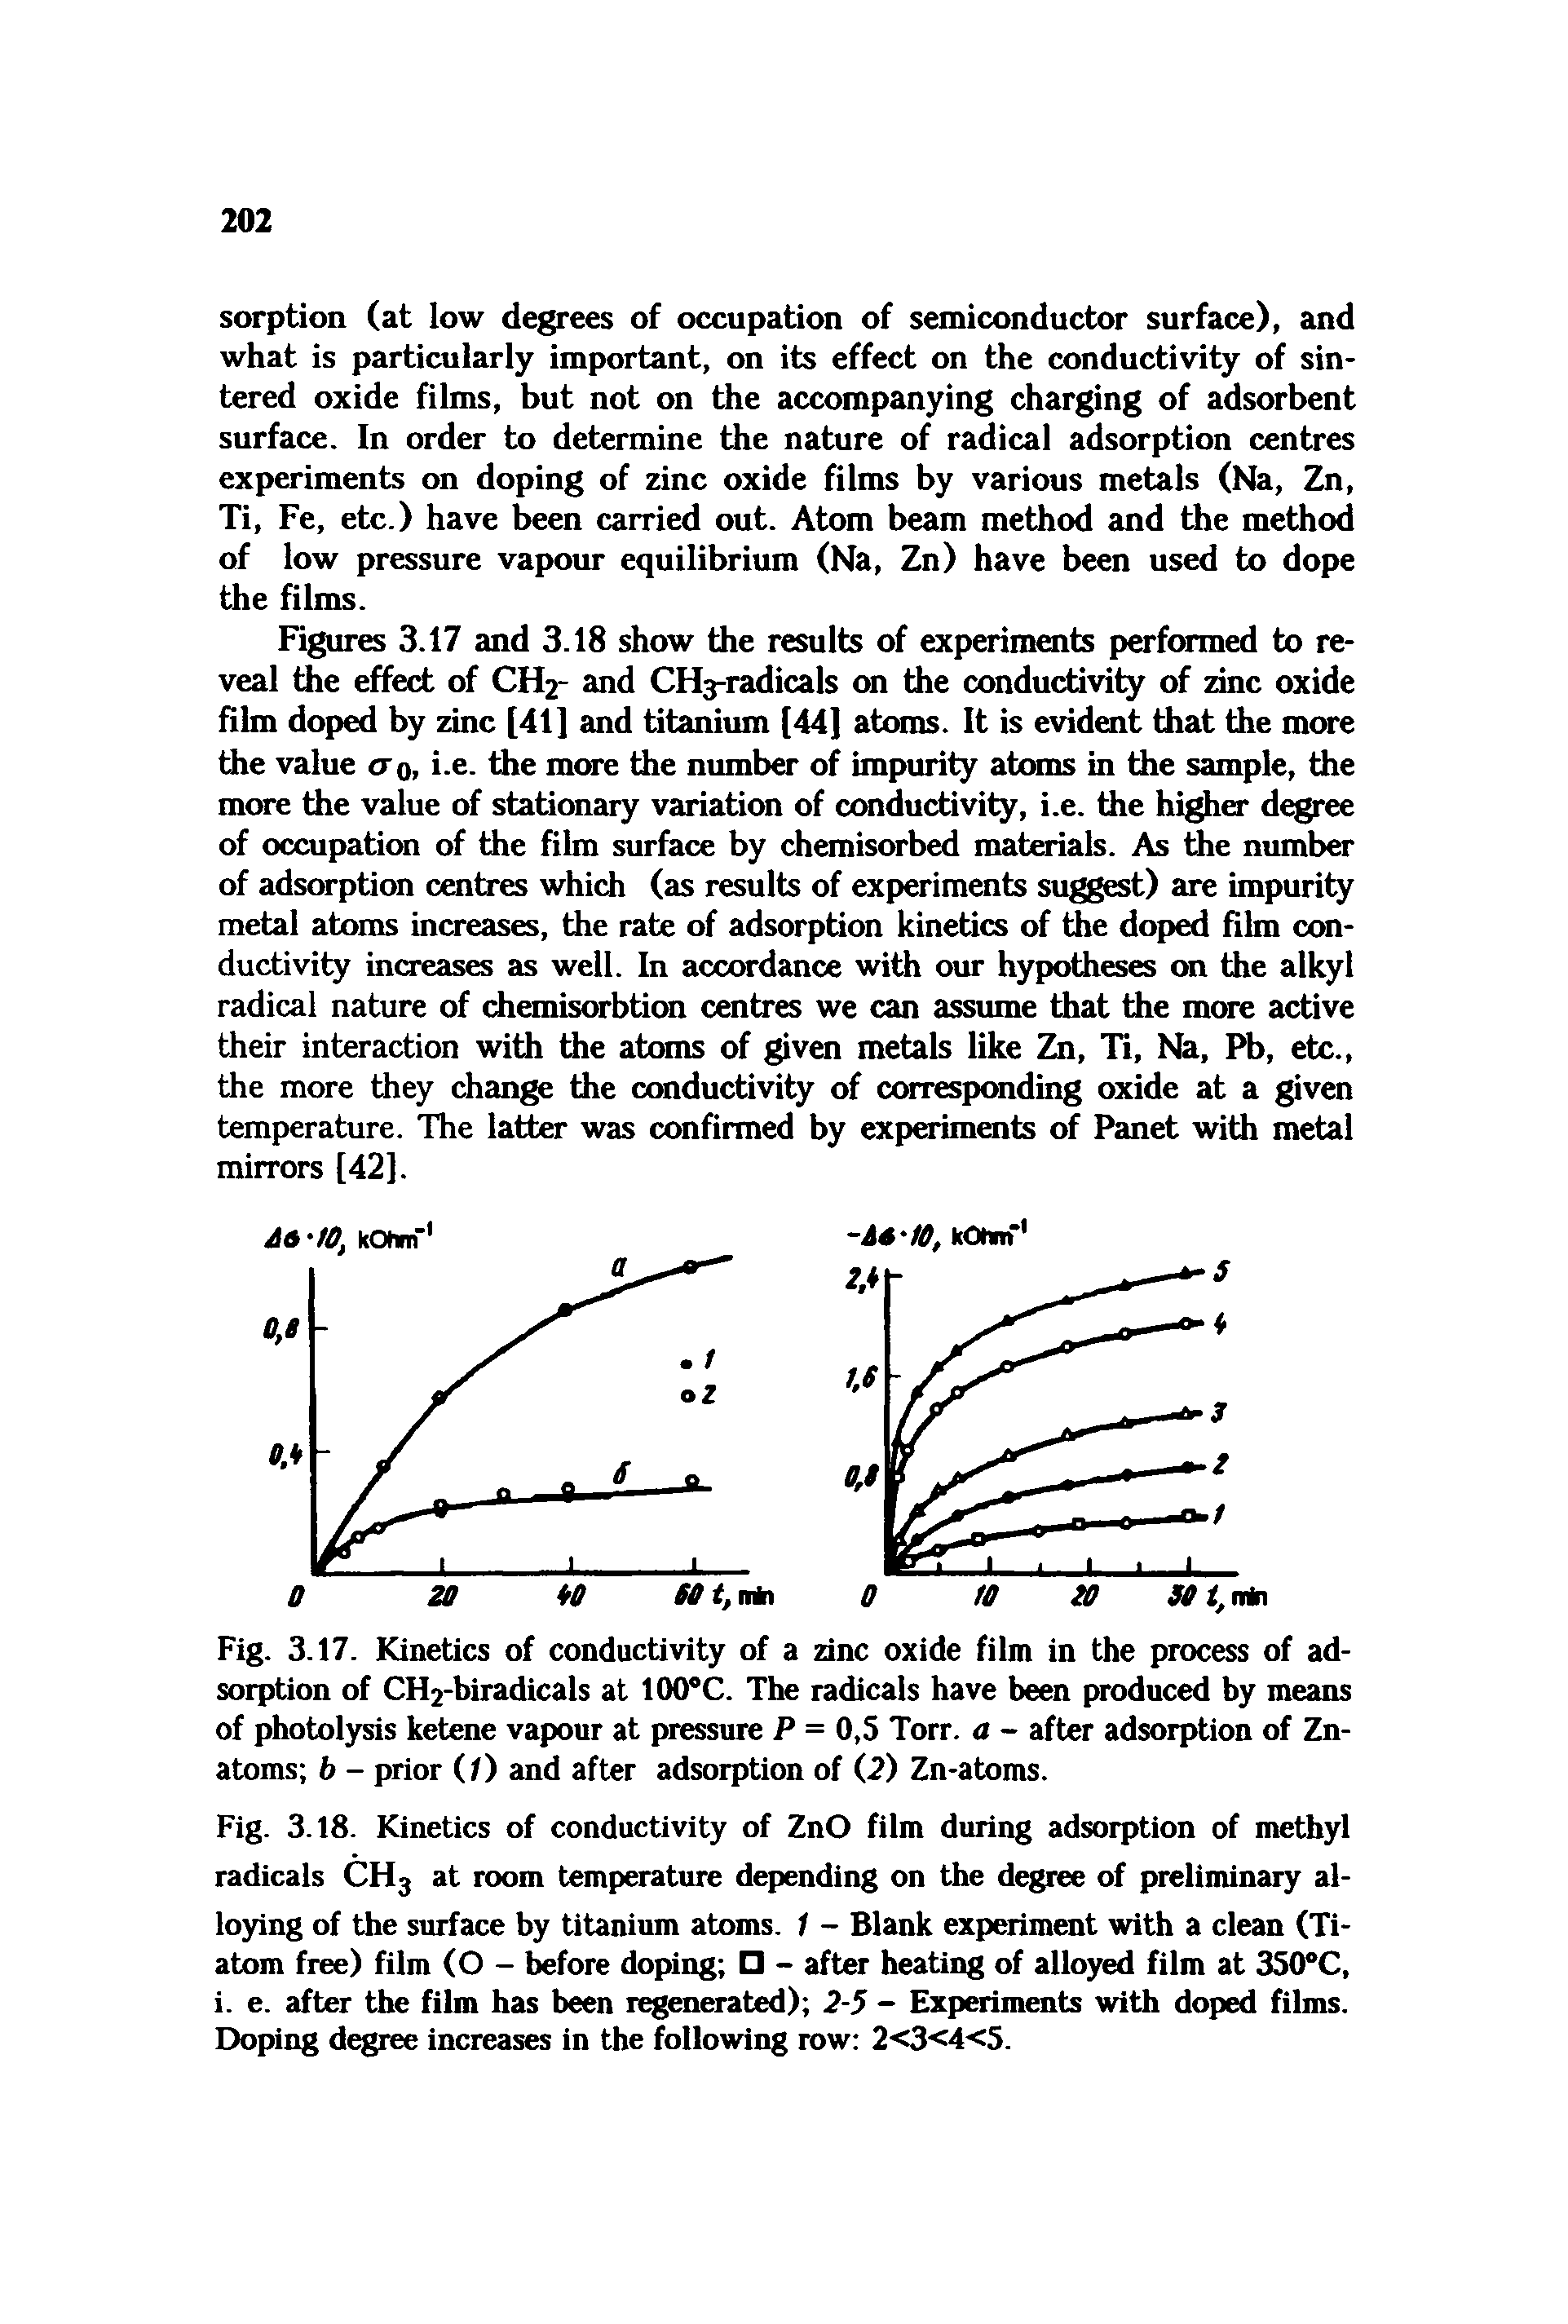 Fig. 3.17. Kinetics of conductivity of a zinc oxide film in the process of adsorption of CH2-biradicals at 100 C. The radicals have been produced by means of photol)rsis ketene vapour at pressure P = 0,5 Torr. a - after adsorption of Zn-atoms b - prior (/) and after adsorption of (2) Zn-atoms.